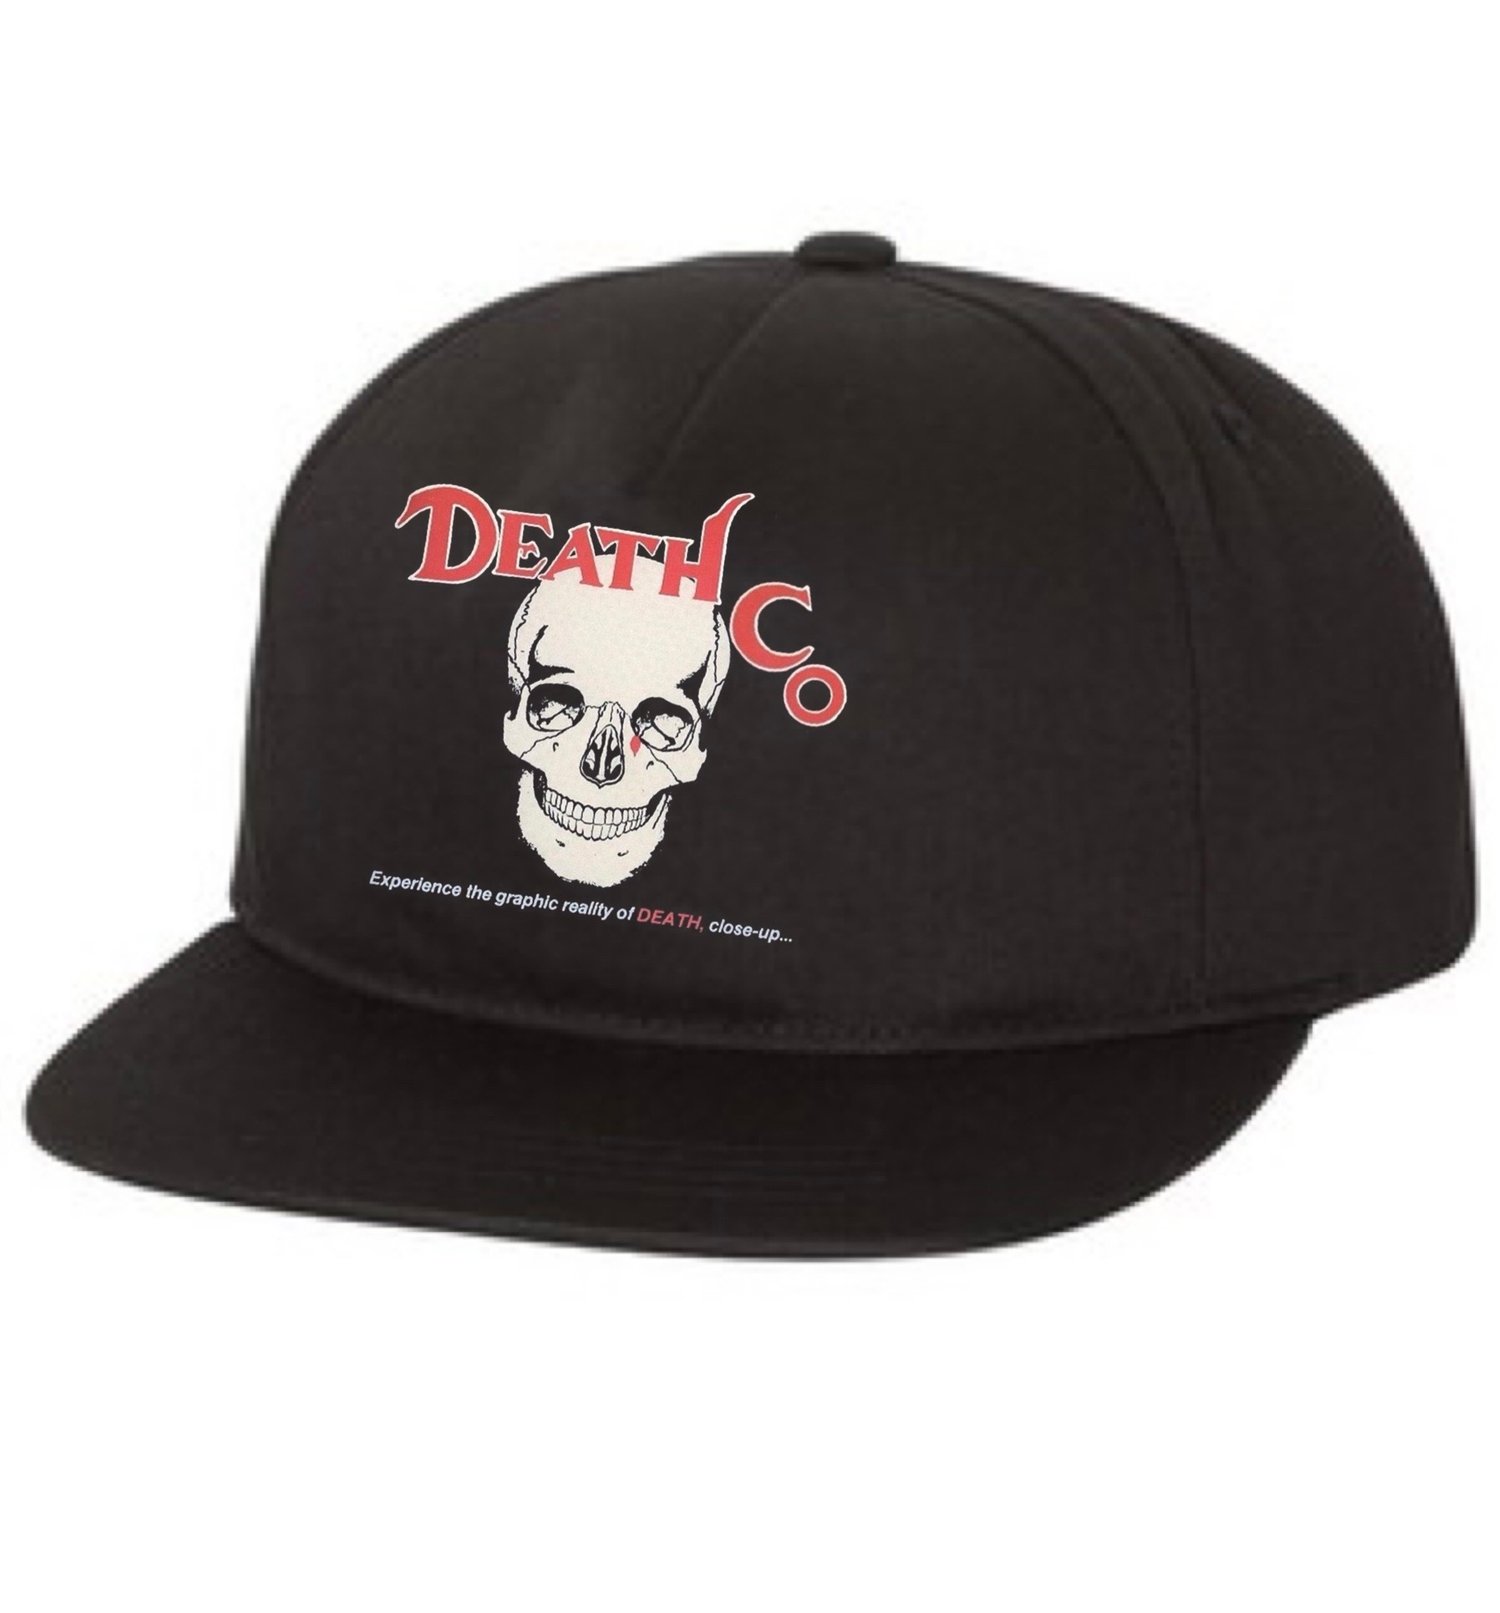 faces of death co snapback hat | death co.